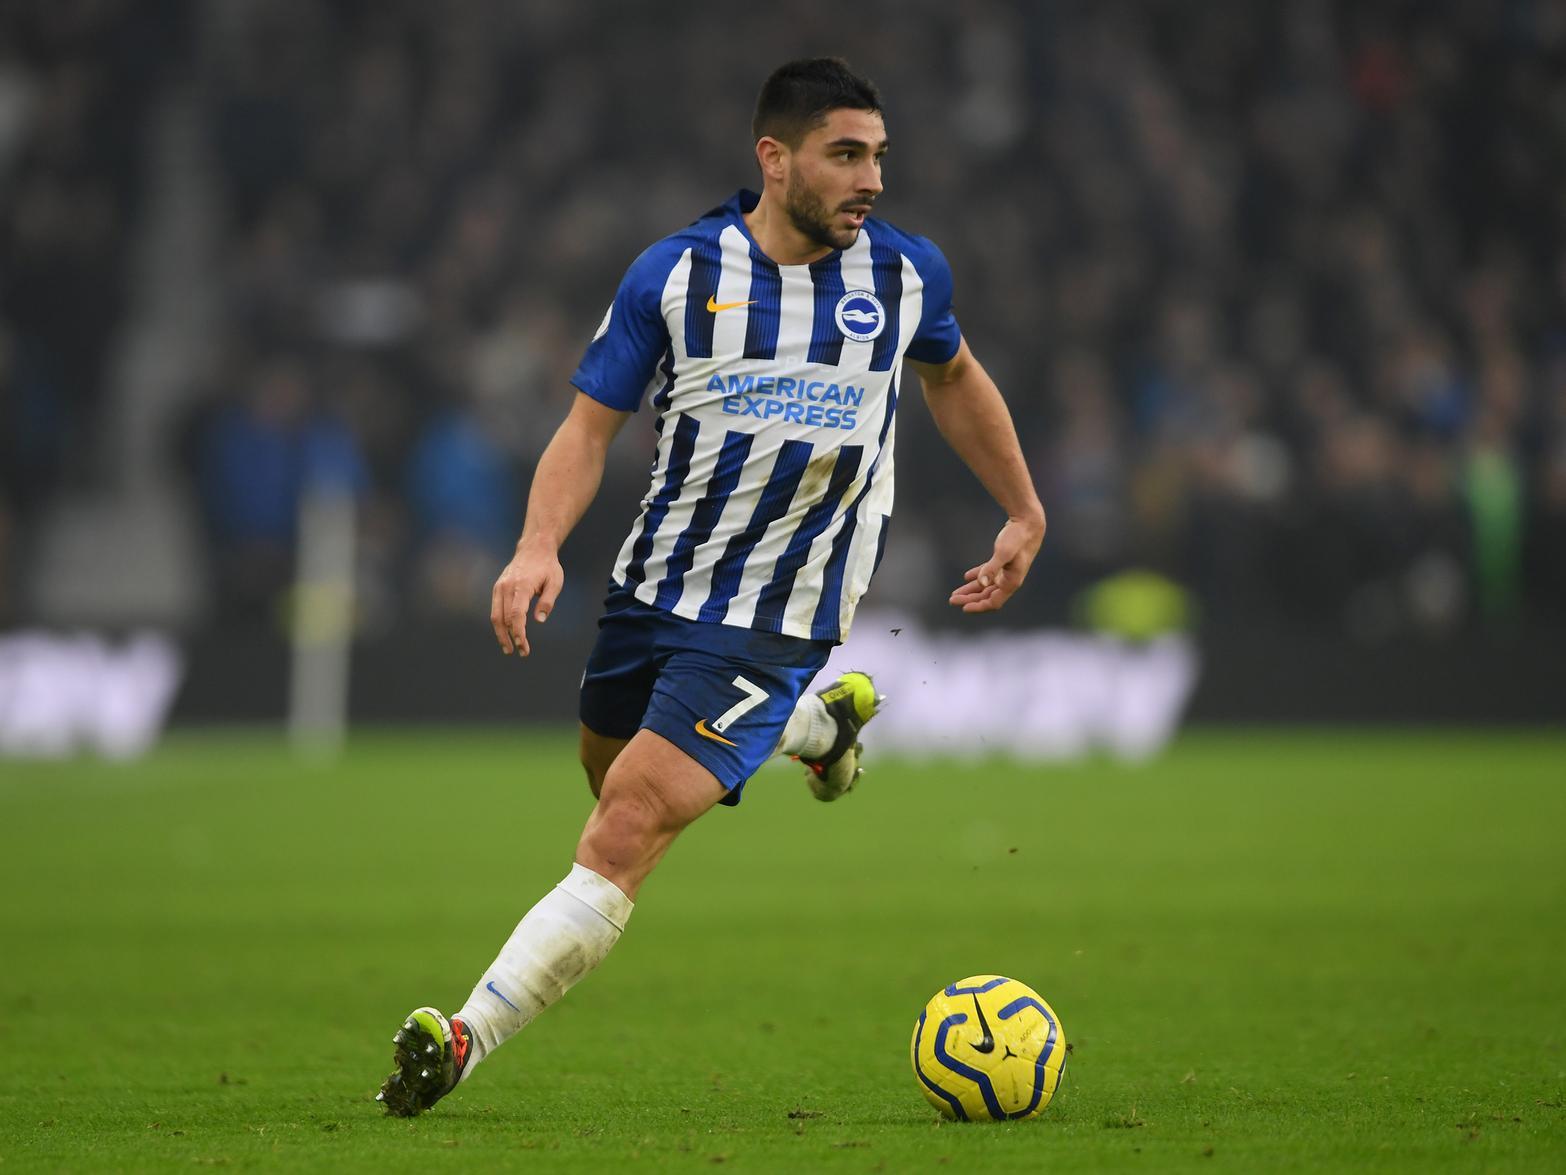 Napoli have been linked with a shock move for Brighton & Hove Albion striker Neal Maupay. (The Telegraph)